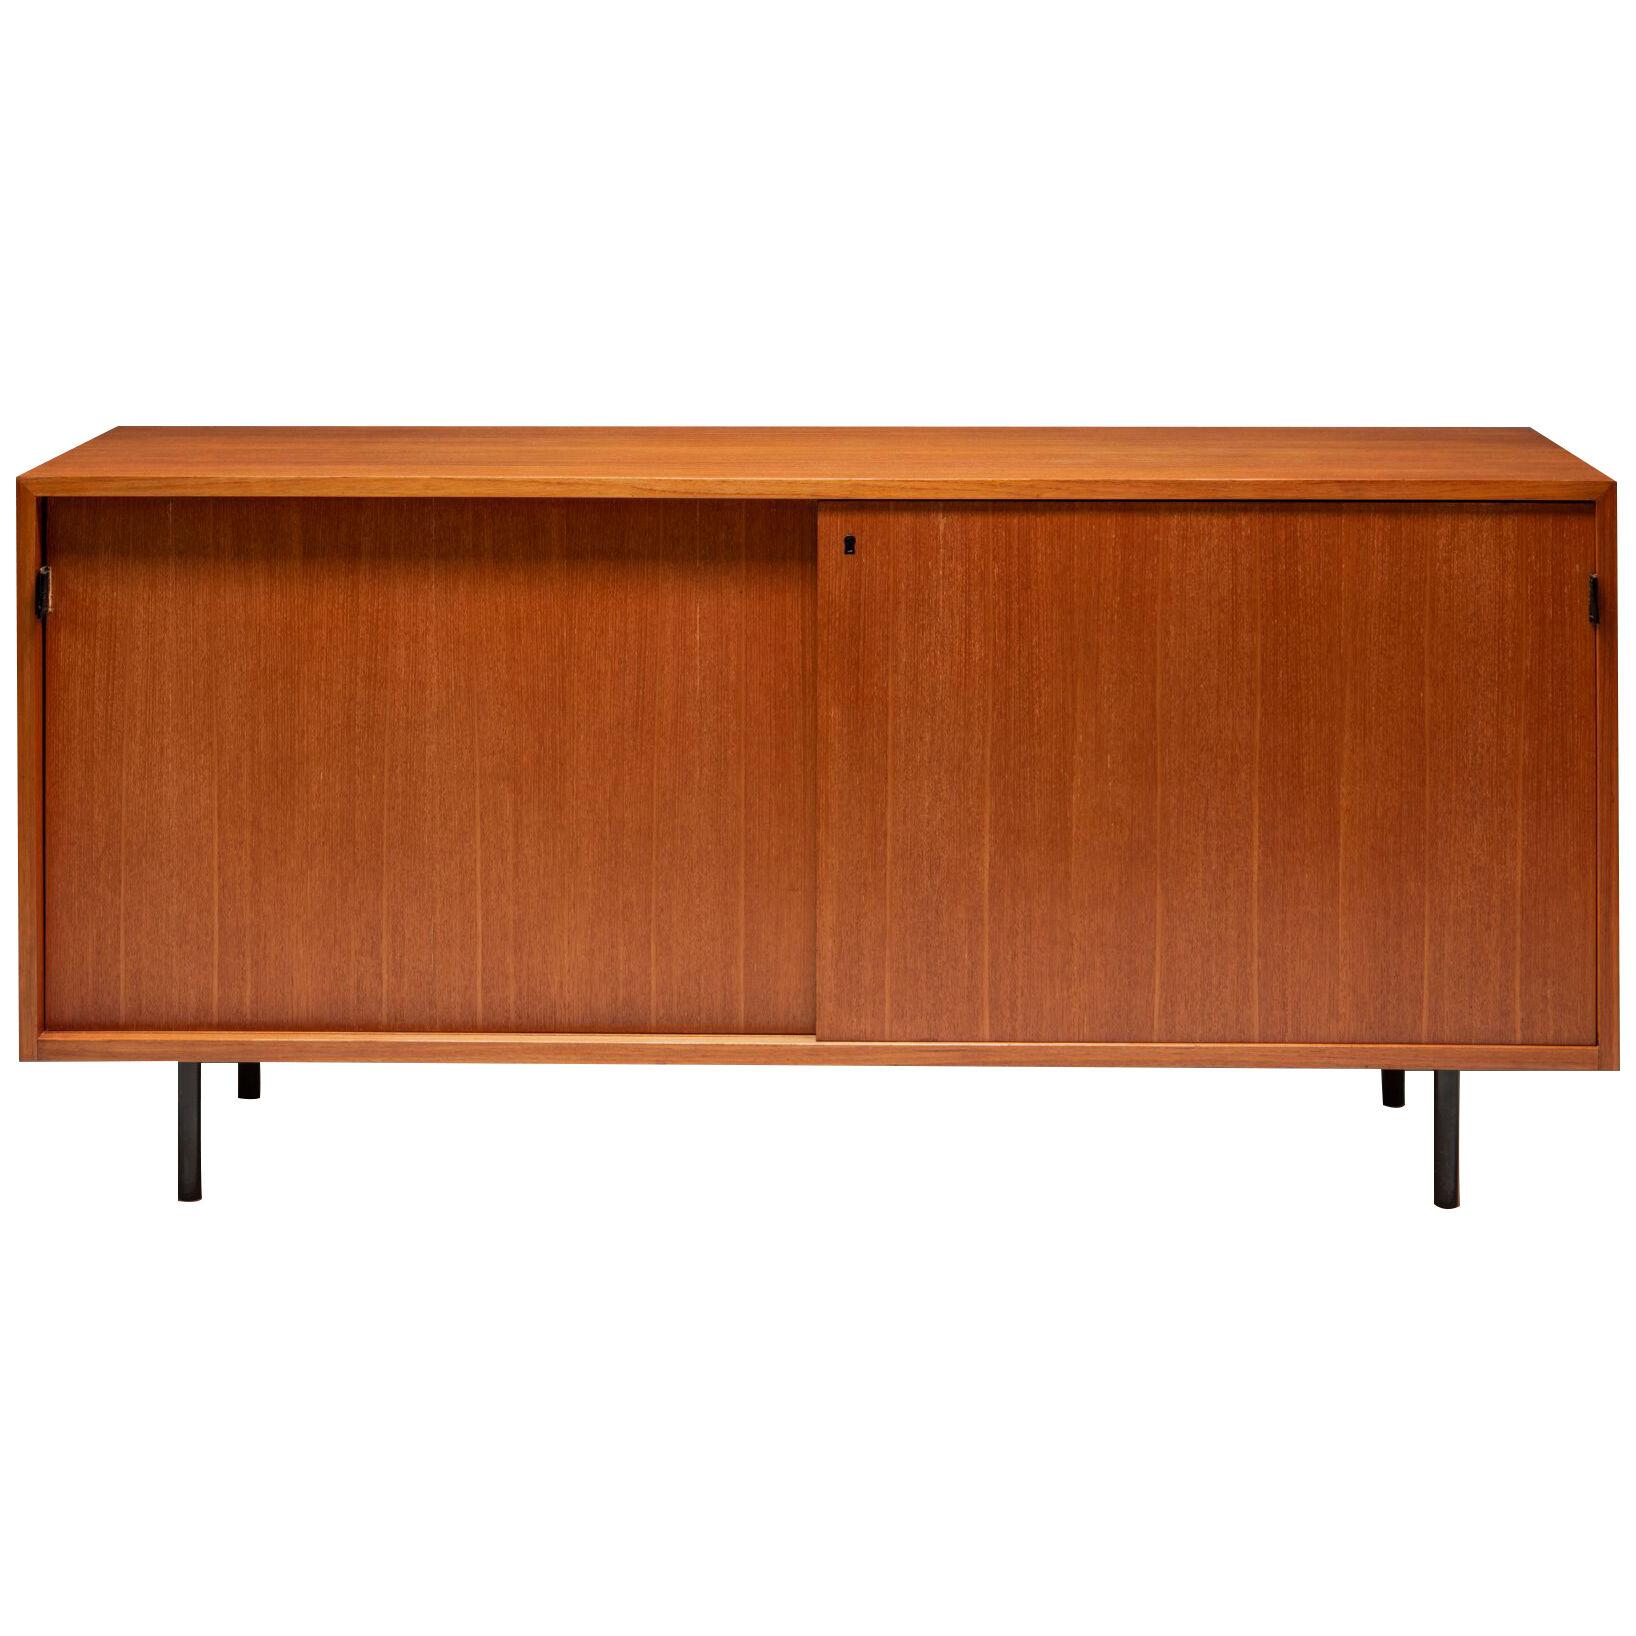 60's Sideboard in Teak designed by Florence Knoll